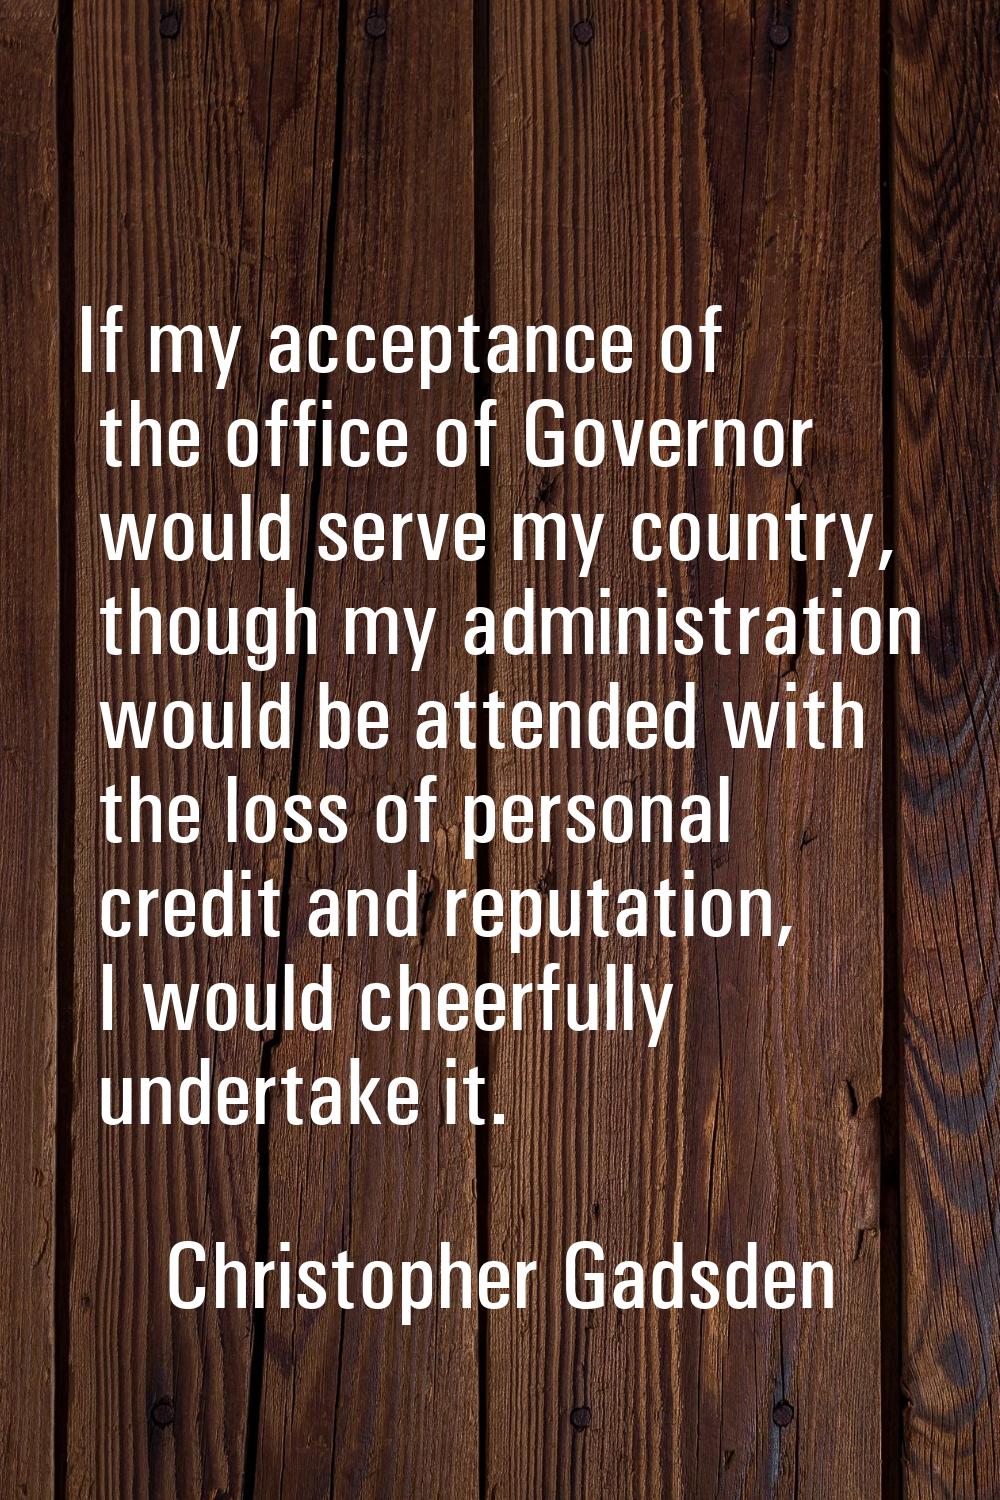 If my acceptance of the office of Governor would serve my country, though my administration would b